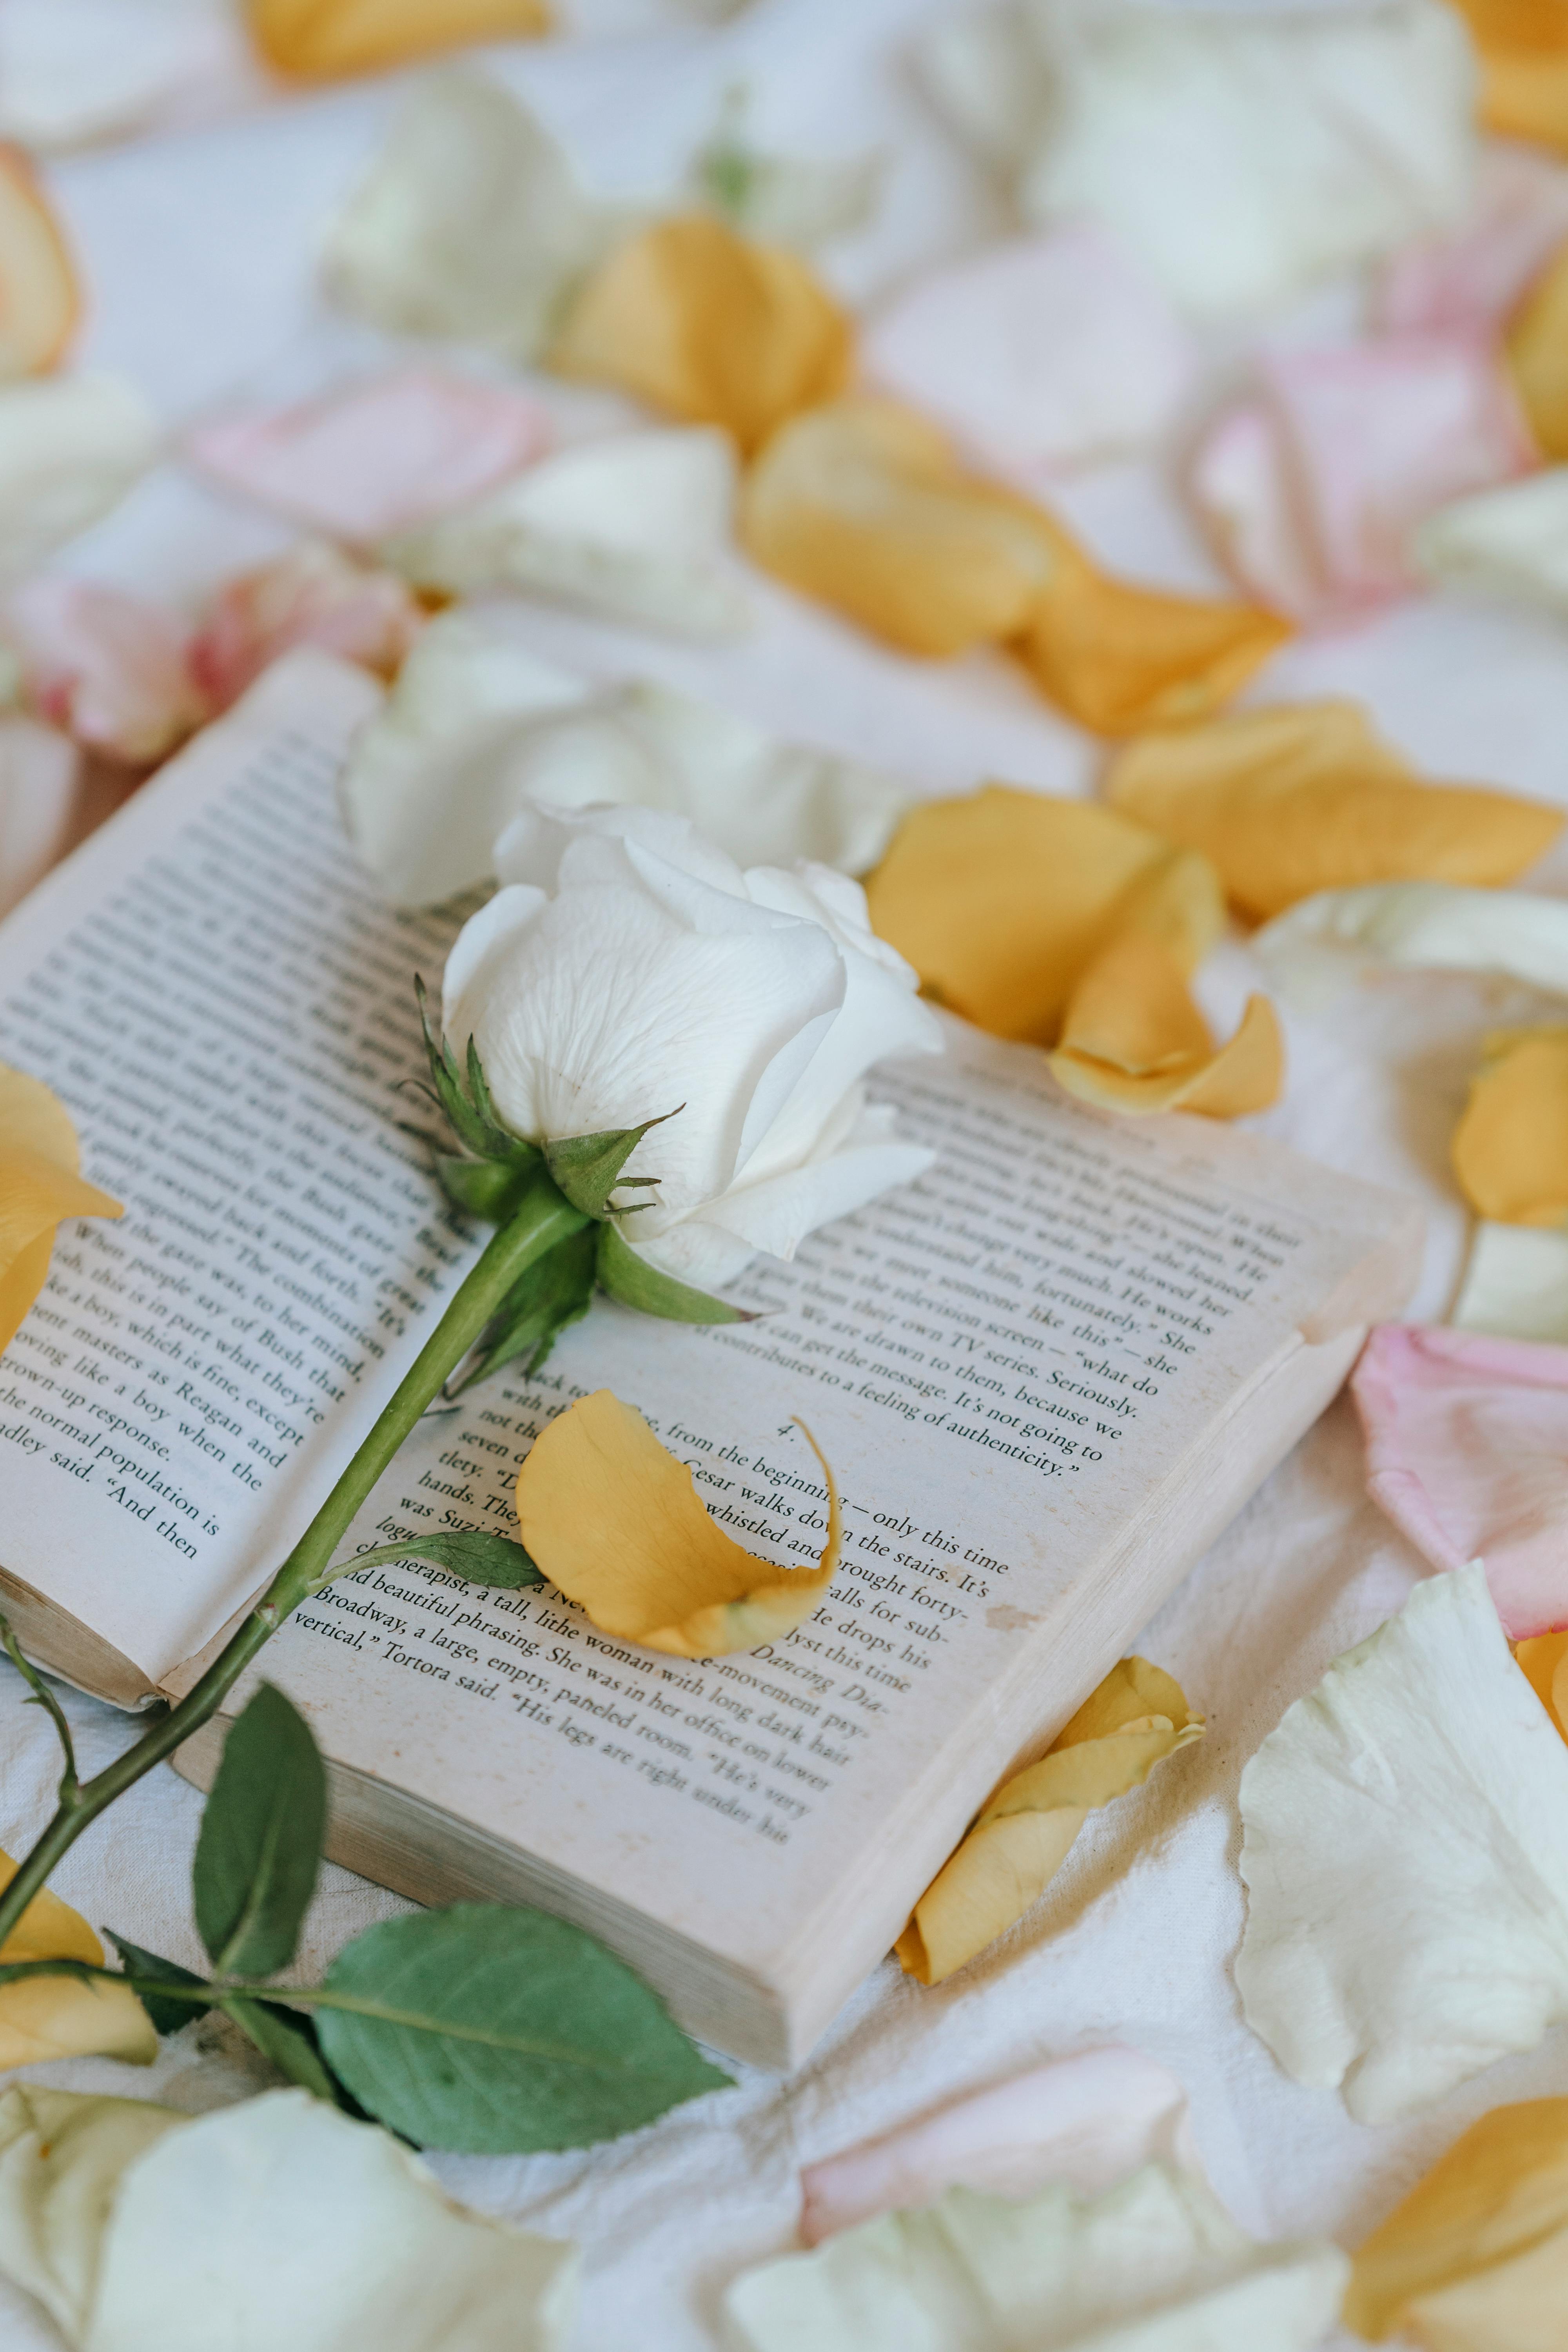 blooming rose with gentle petals on book